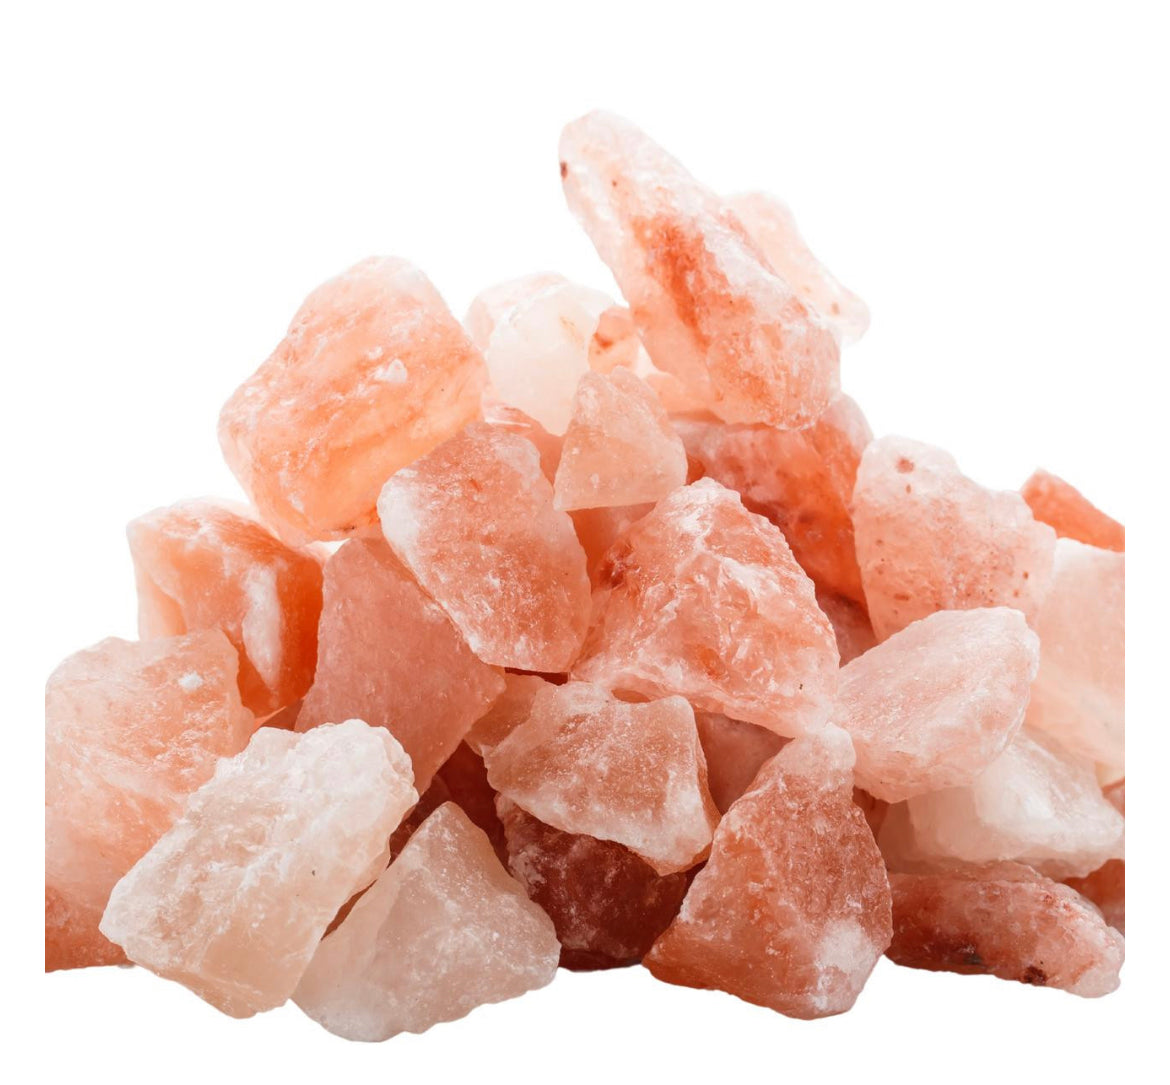 Made with tons of pink Himalayan salt and rose quartz crystals to help manifest feelings of love and "self-love."